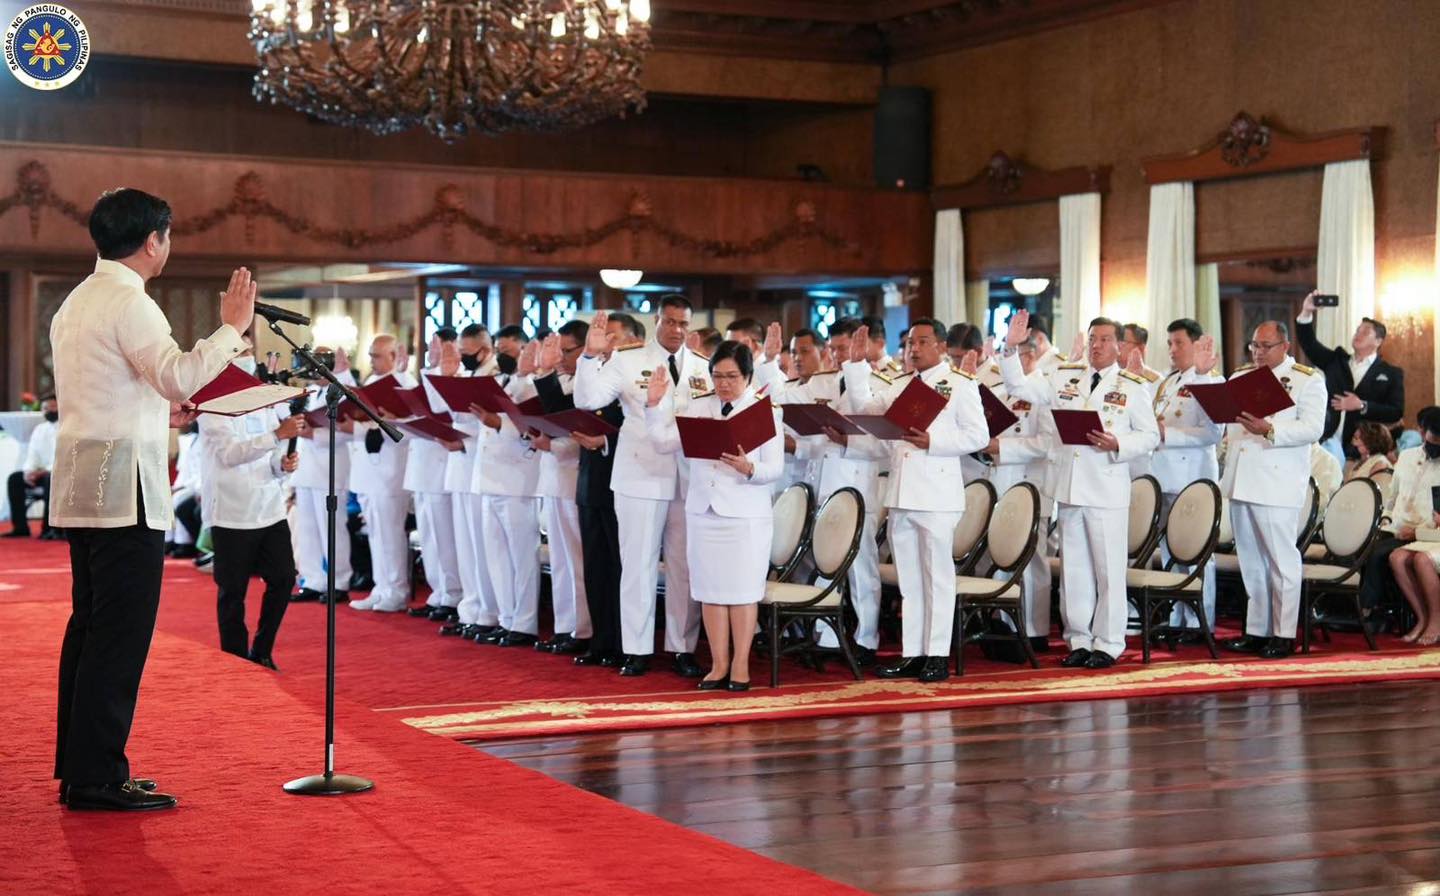 PBBM at oath-taking ceremony of generals and flag officers of the Armed Forces of the Philippines